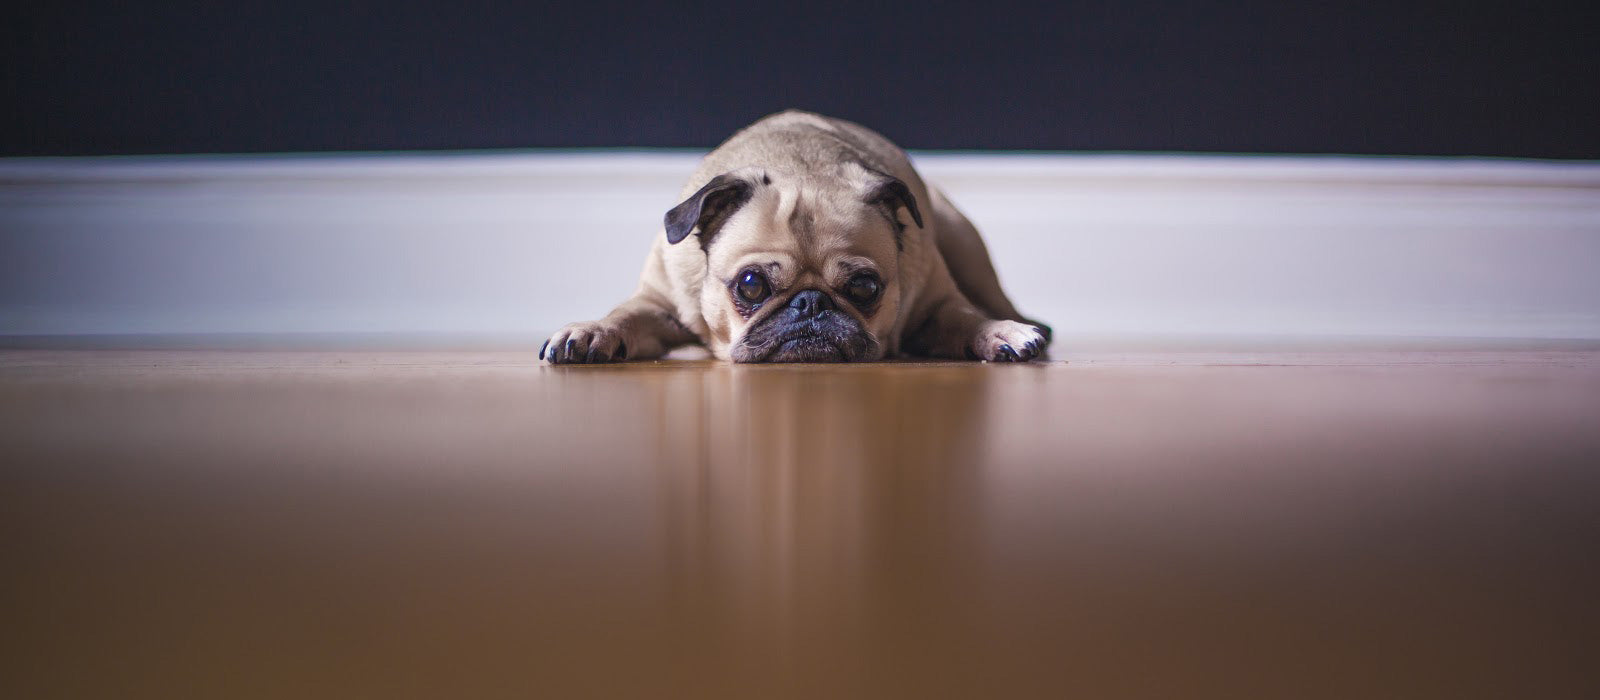 A pug dog laying on a wooden floor